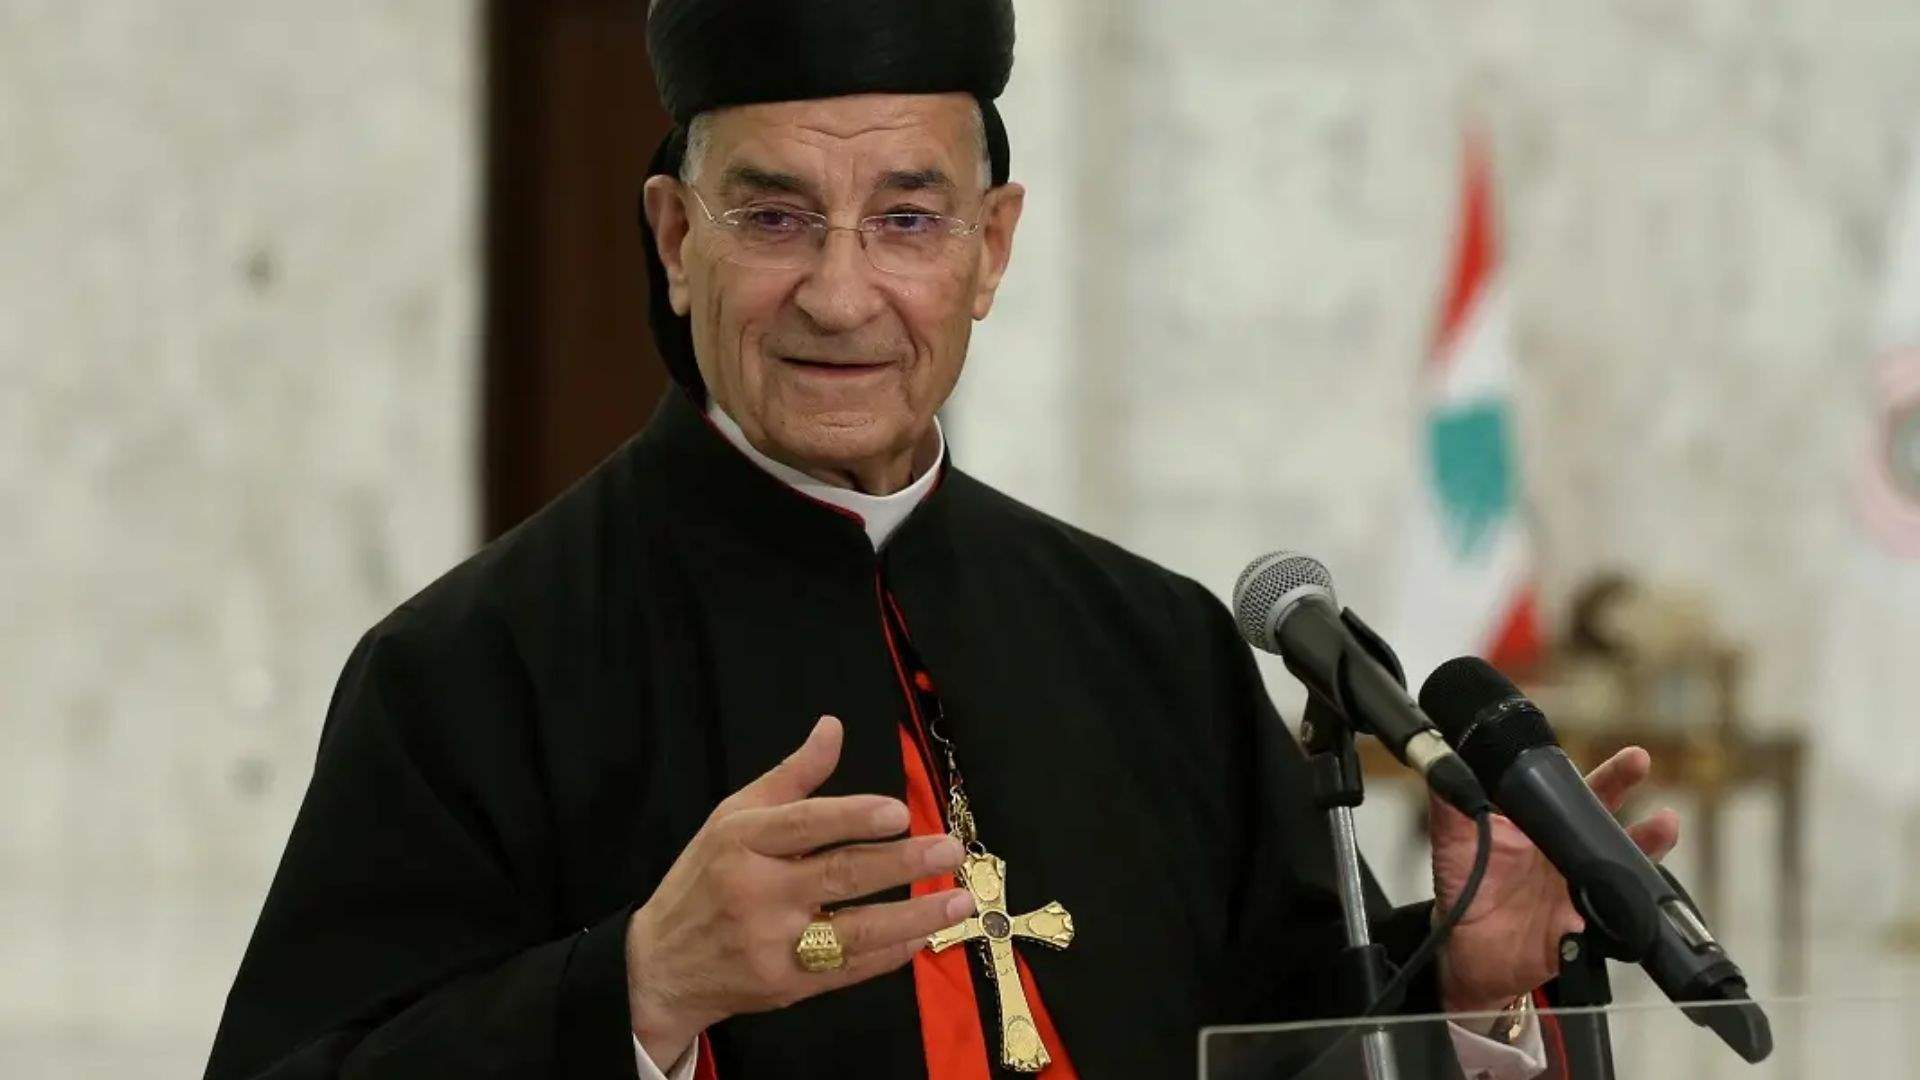 Maronite Patriarch al-Rahi to embark on official visit to Paris to meet with President Macron